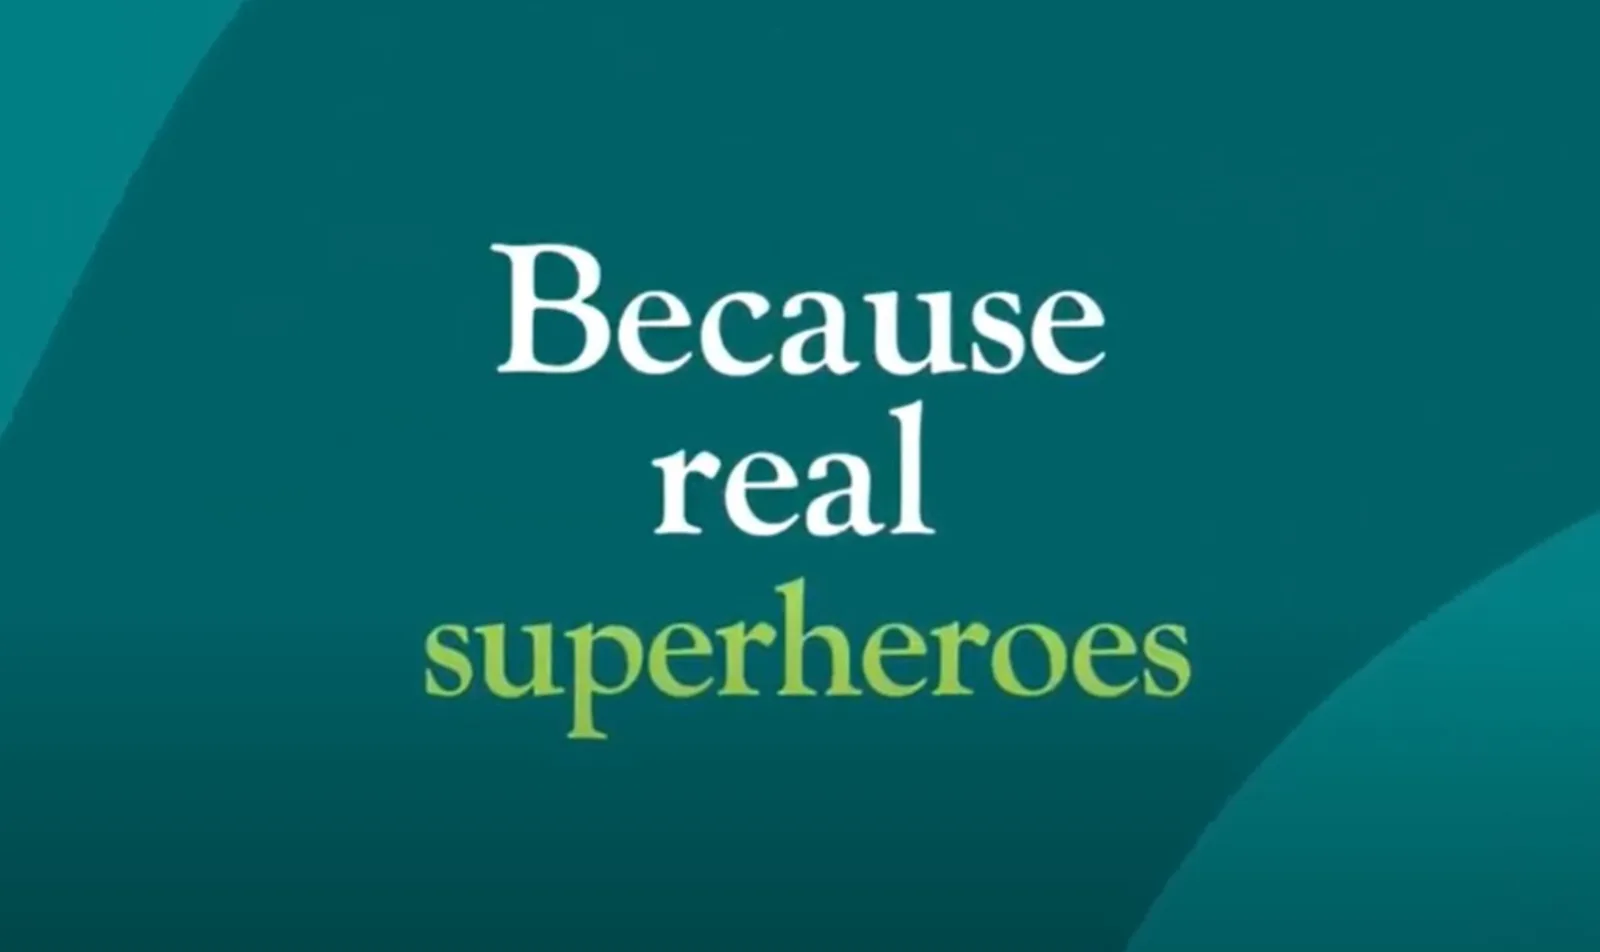 A video thumbnail for the The REAL Superheroes: NVA Caregivers YouTube video